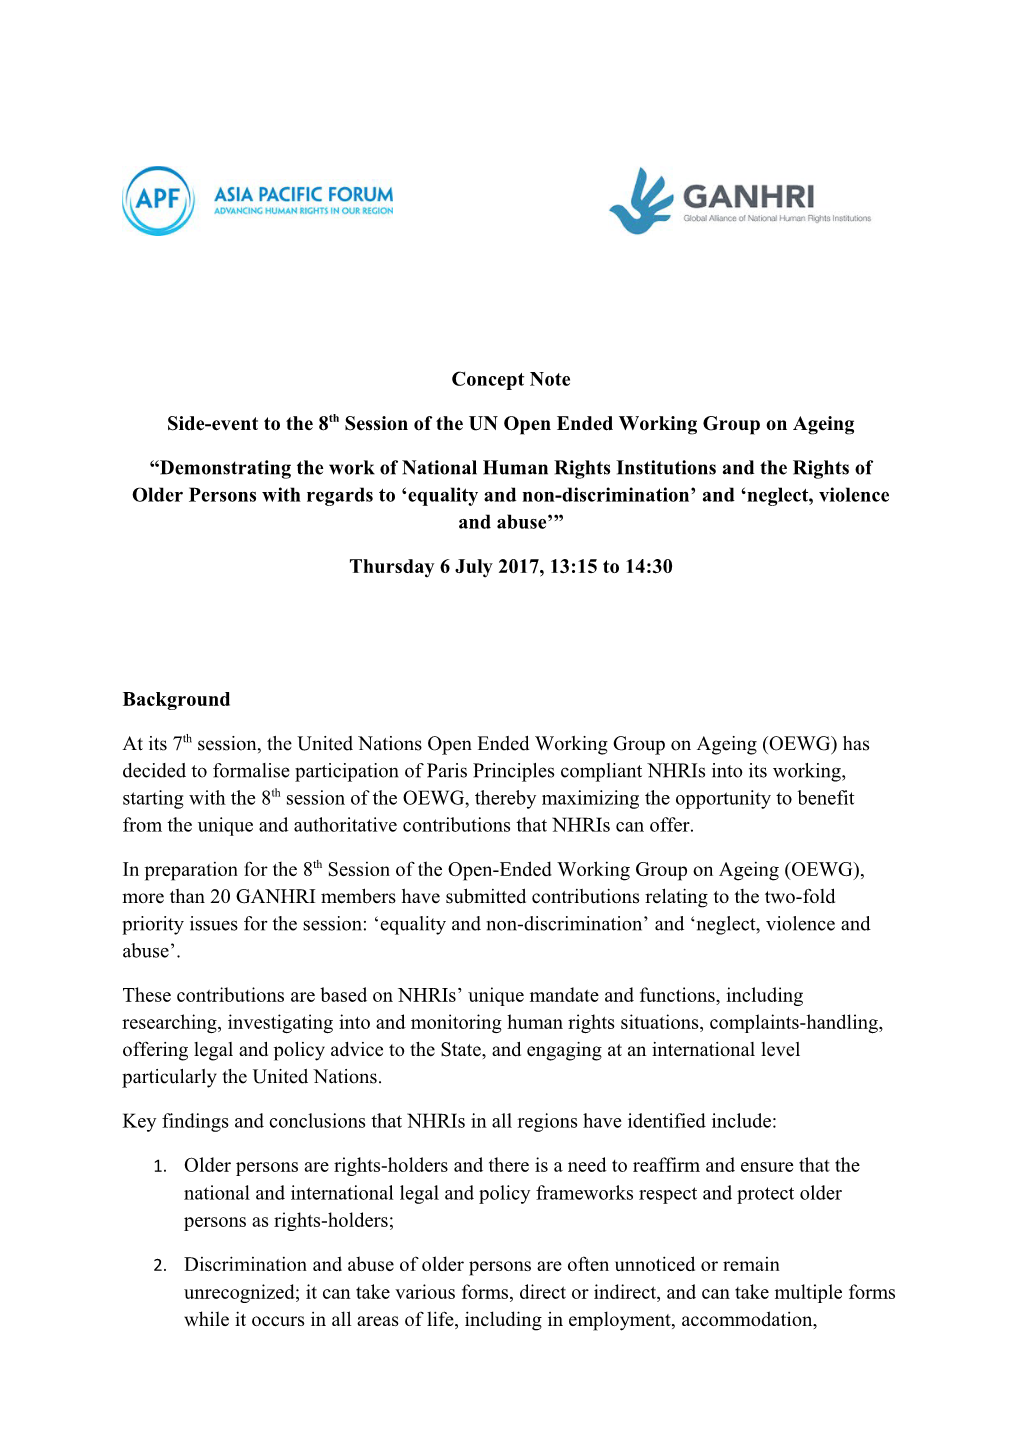 Side-Event to the 8Th Session of the UN Open Ended Working Group on Ageing